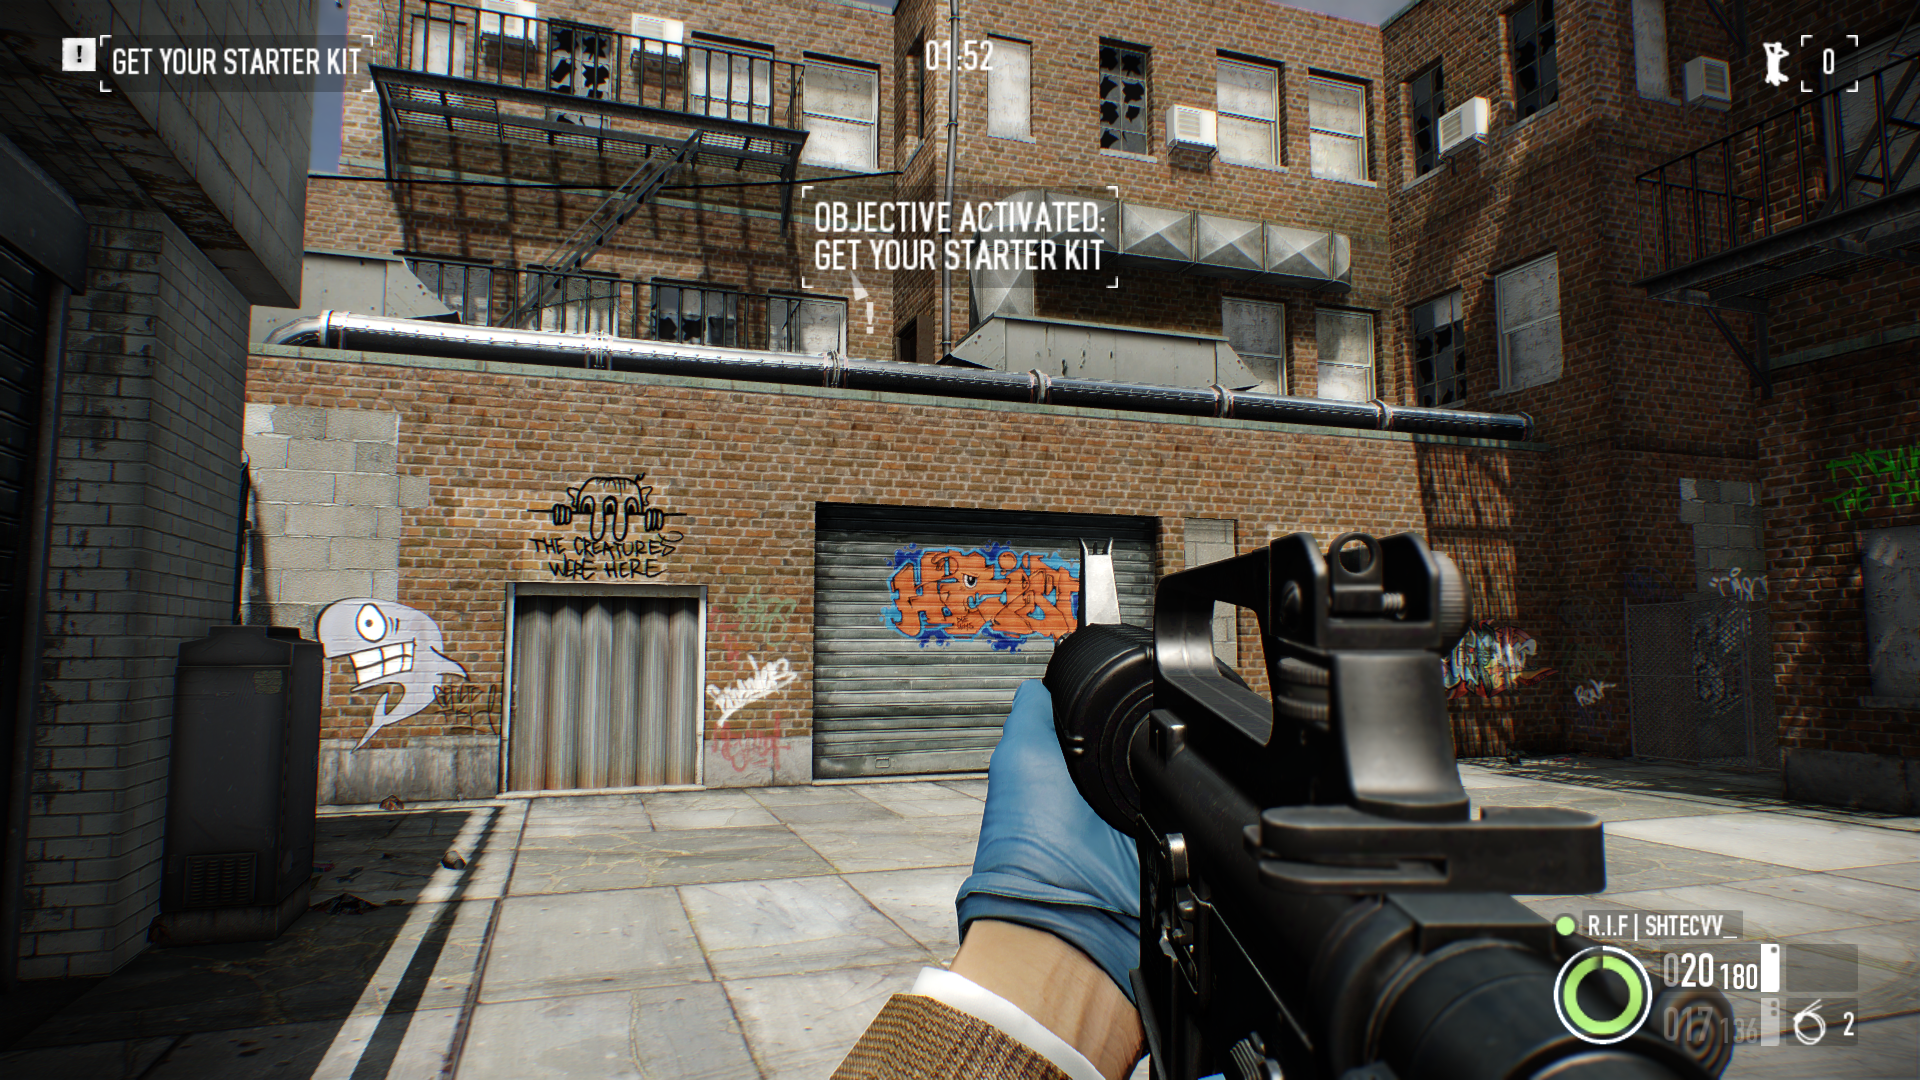 Bot bullet collision fixer payday 2 фото 117